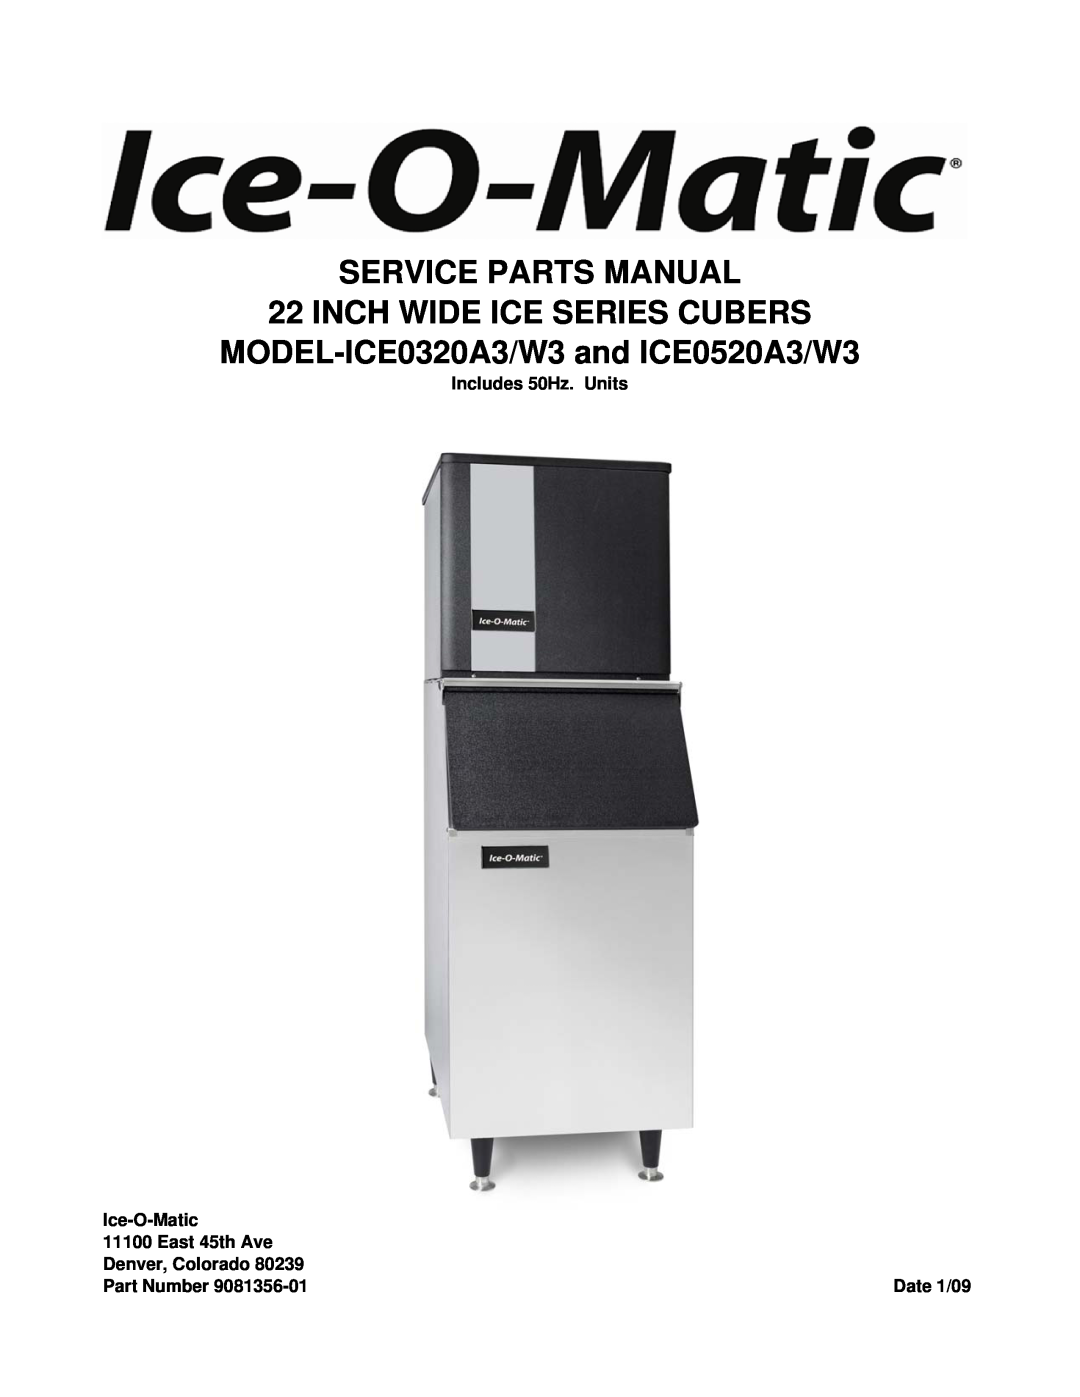 Ice-O-Matic ICE0320W3 manual Service Parts Manual, Inch Wide Ice Series Cubers, MODEL-ICE0320A3/W3and ICE0520A3/W3 